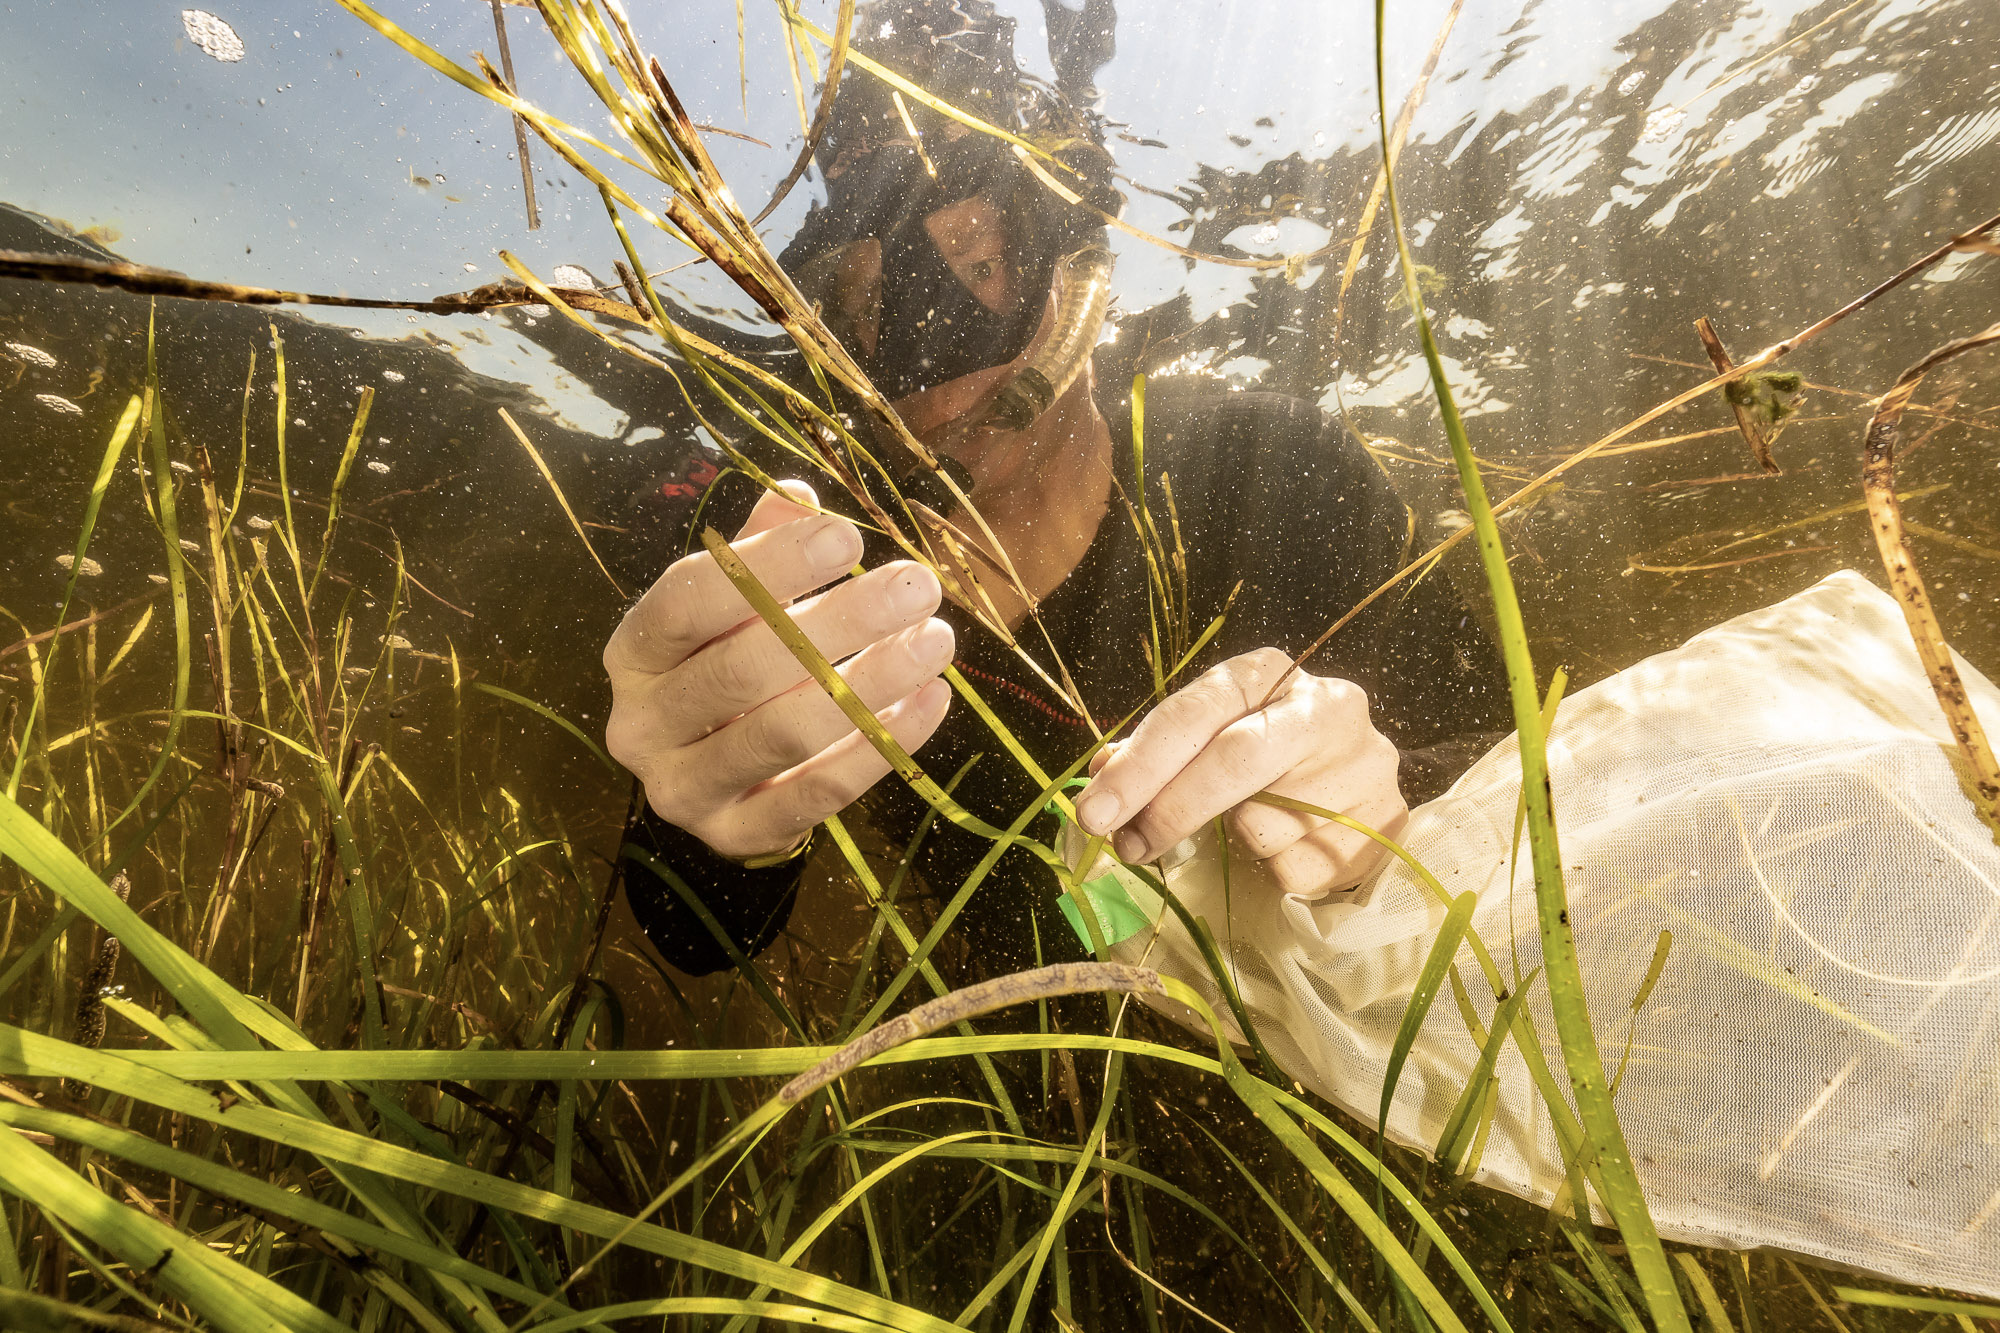 A person with a mask and snorkel holds a bundle of eelgrass underwater, along with a mesh-like bag